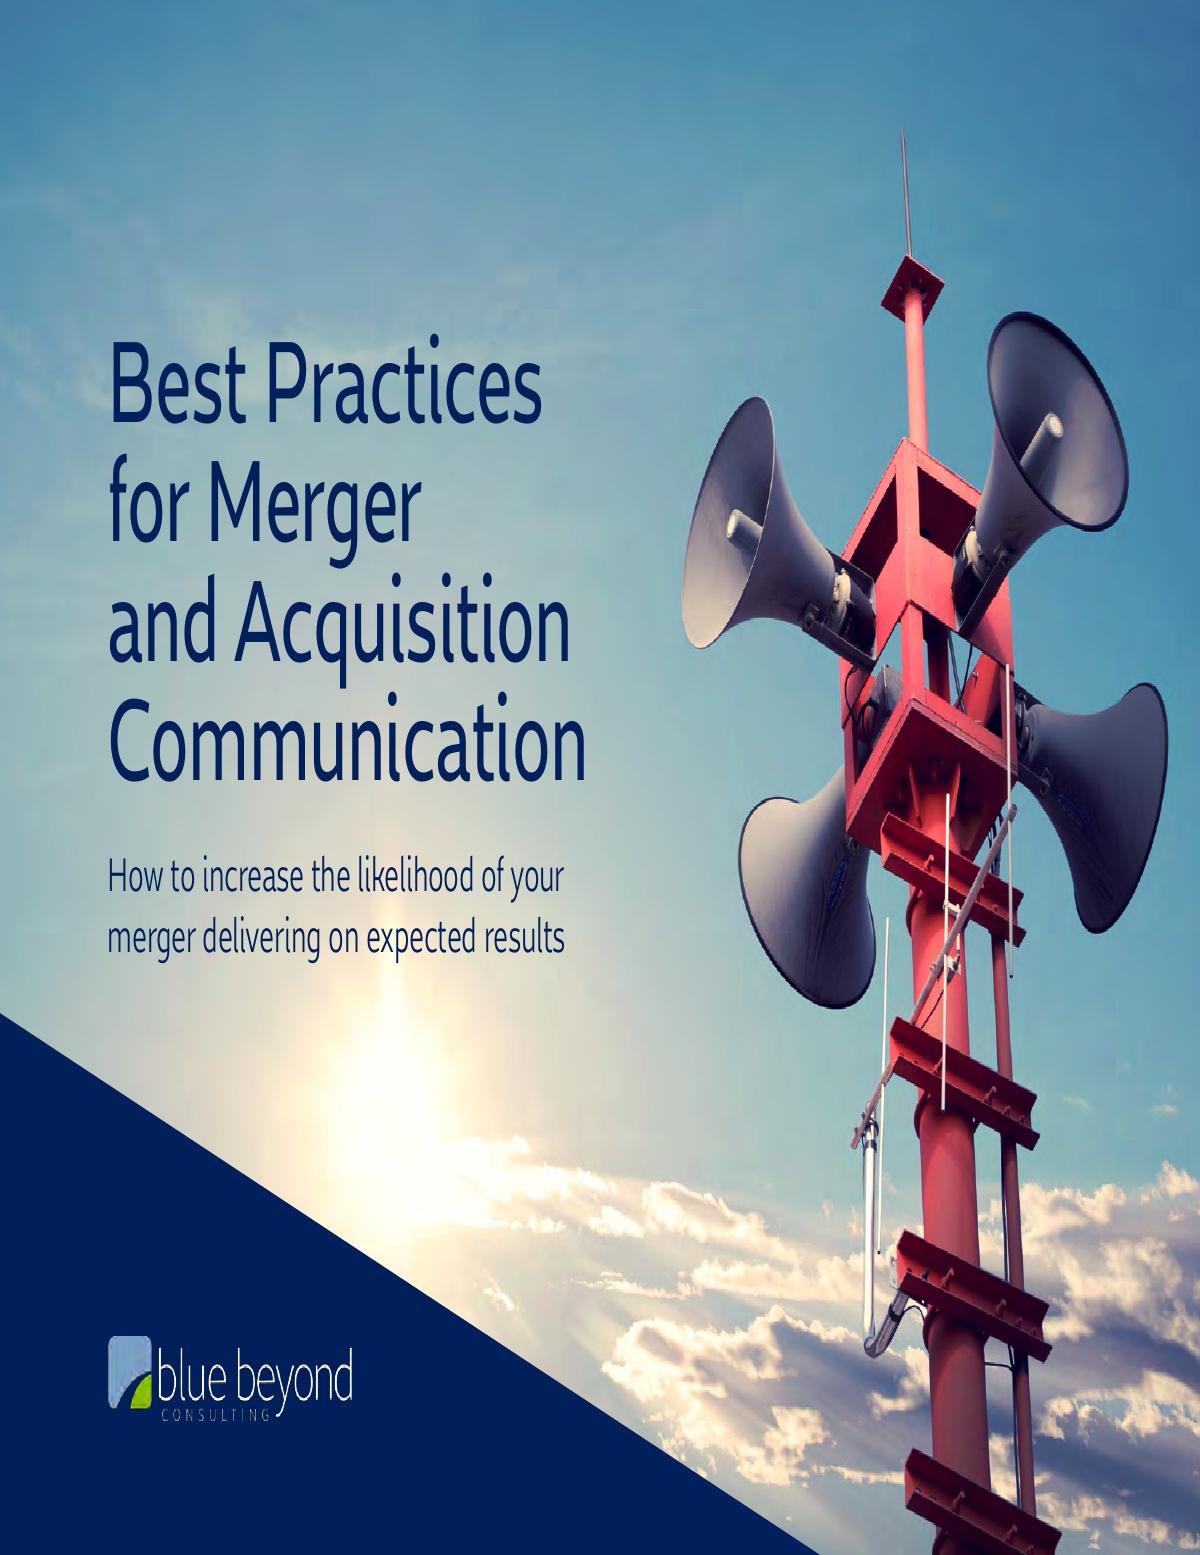 Best Practices for Merger and Acquisition Communication